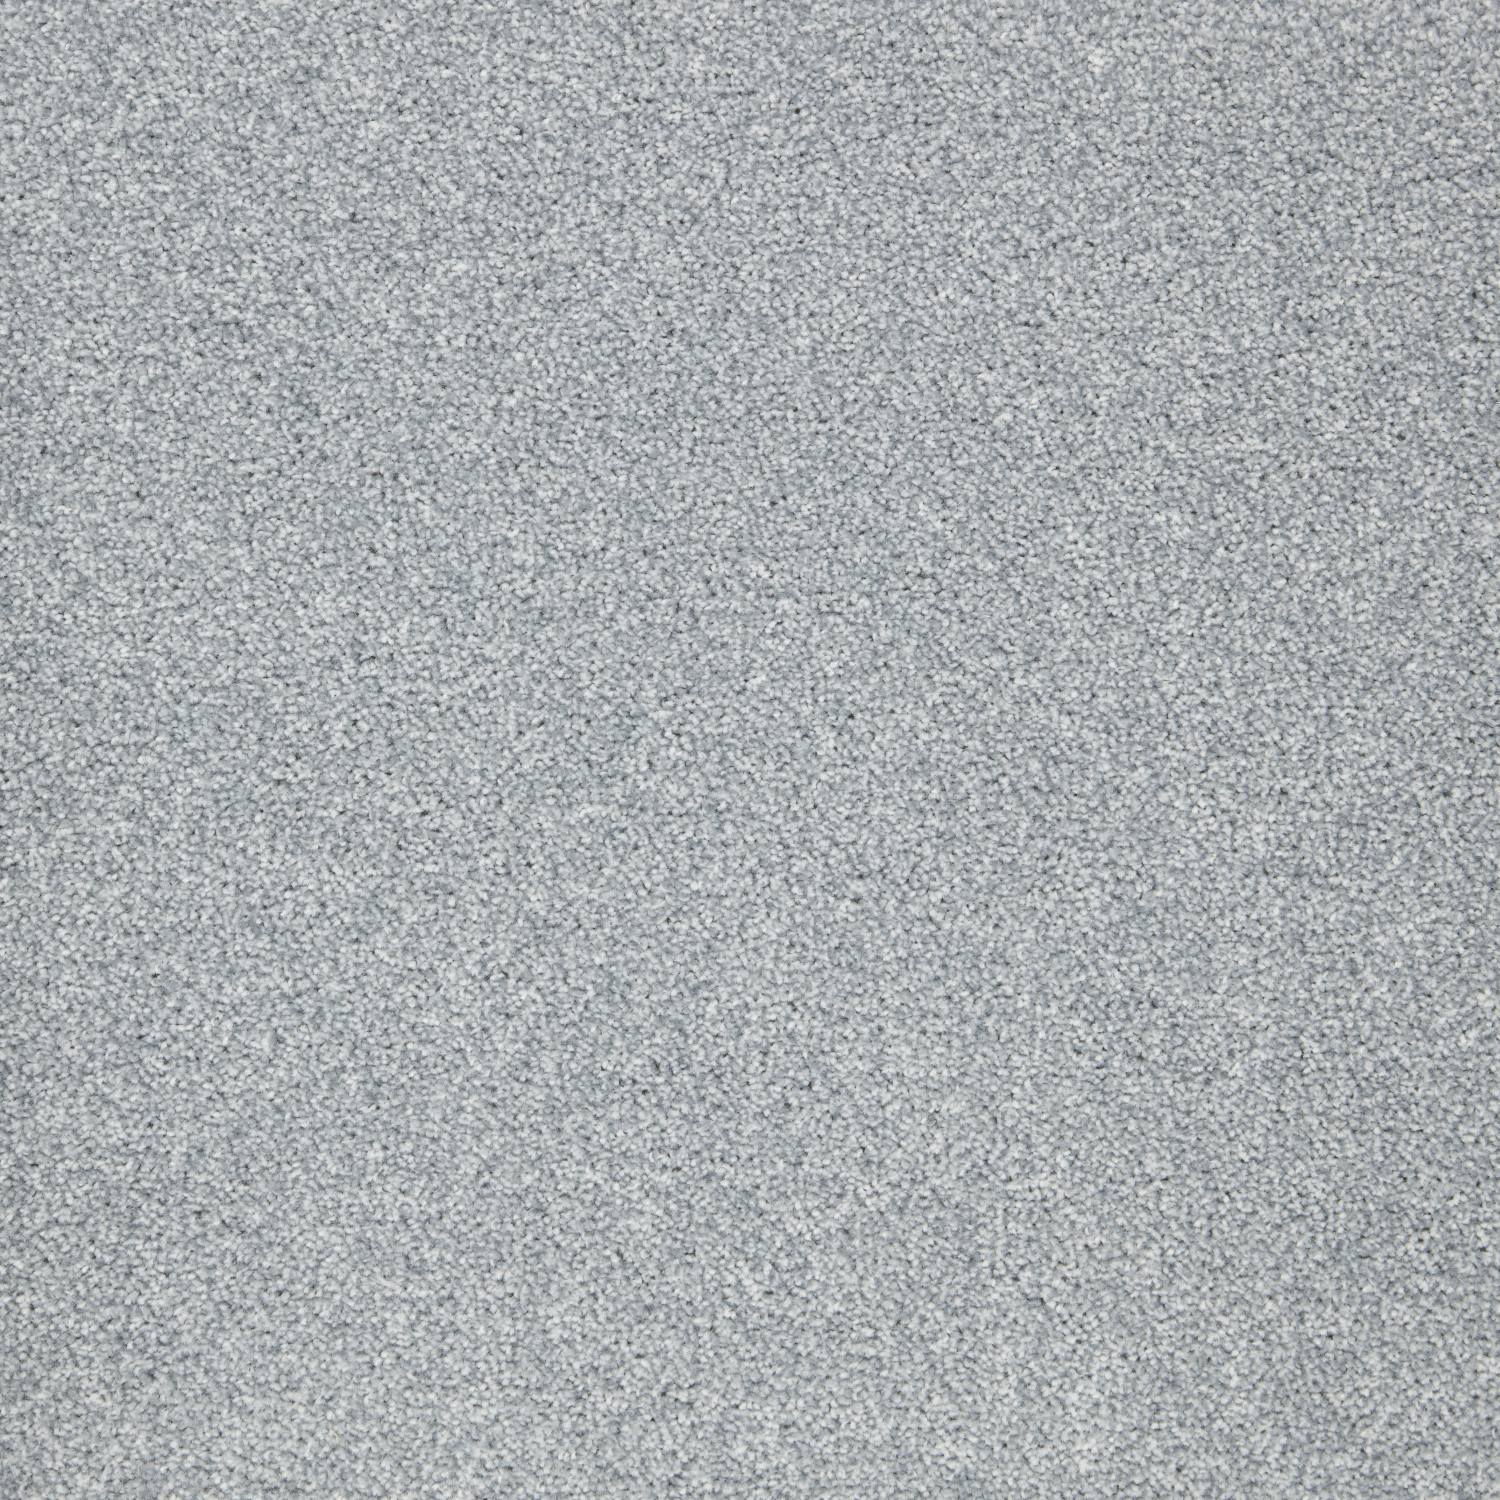 Avondale Heathers Recycled Twist Carpet - 1884 Cloudy Bay